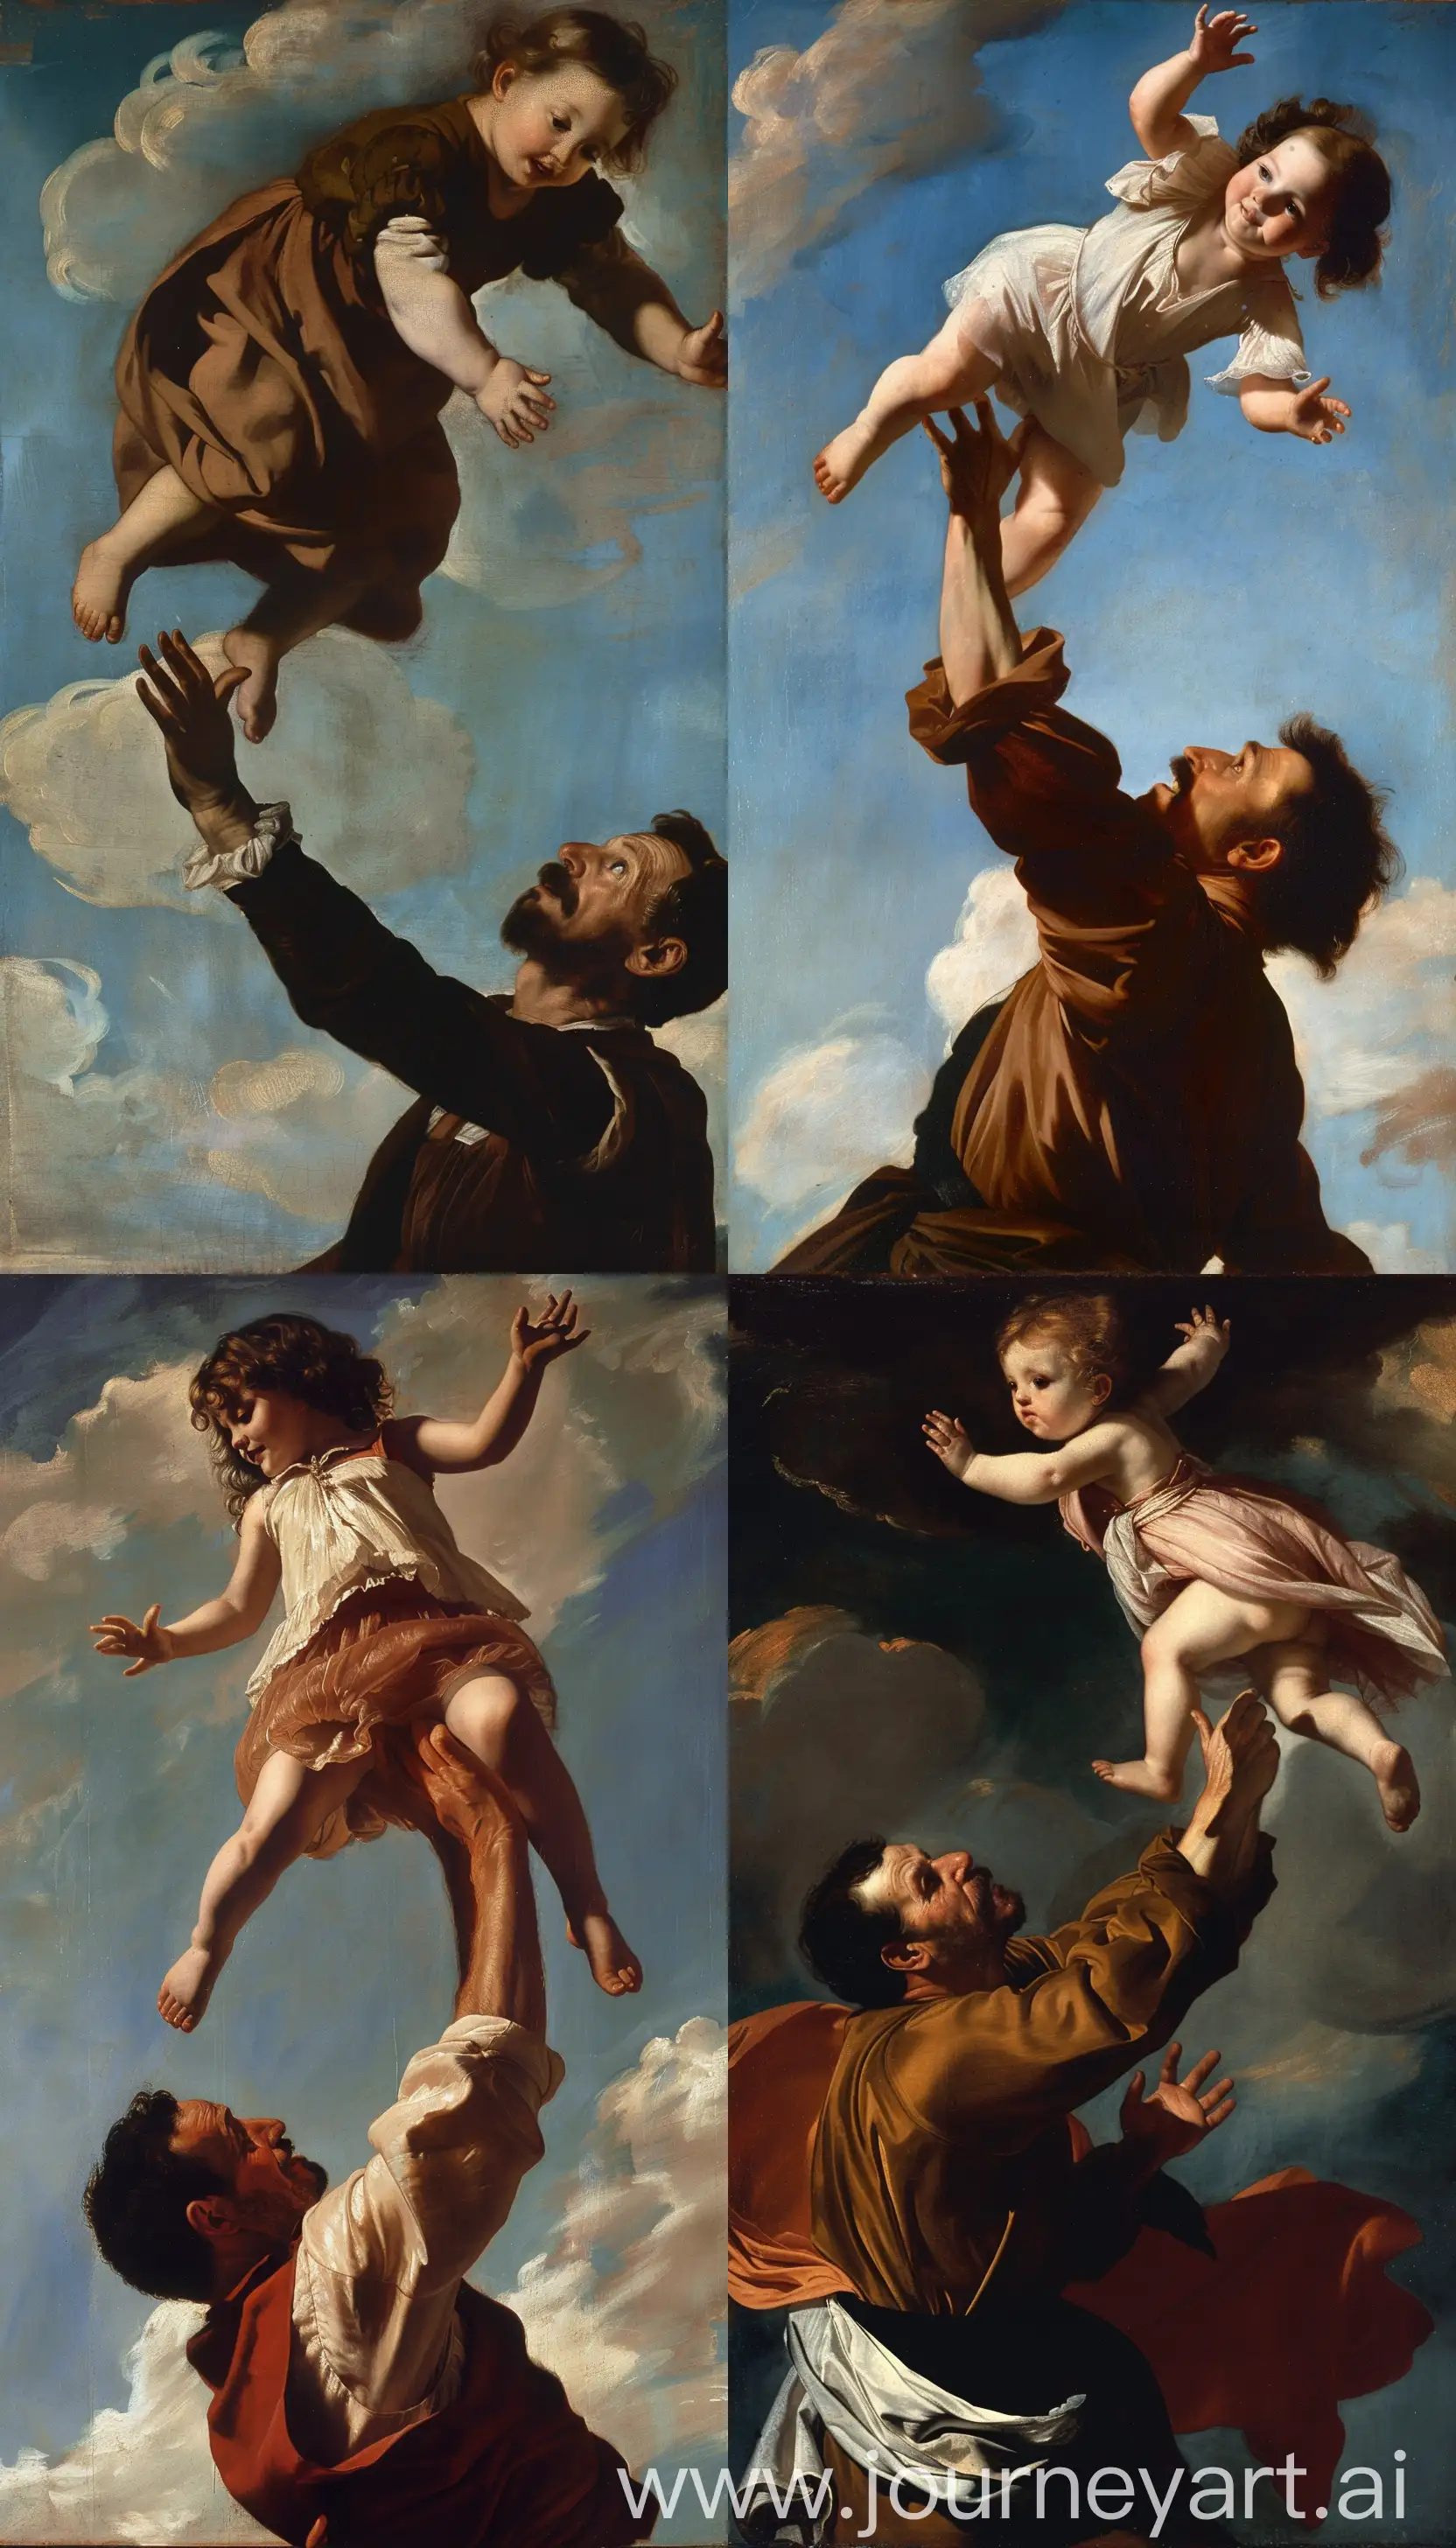 Joyful-Father-Tossing-Daughter-Skyward-in-Caravaggio-Style